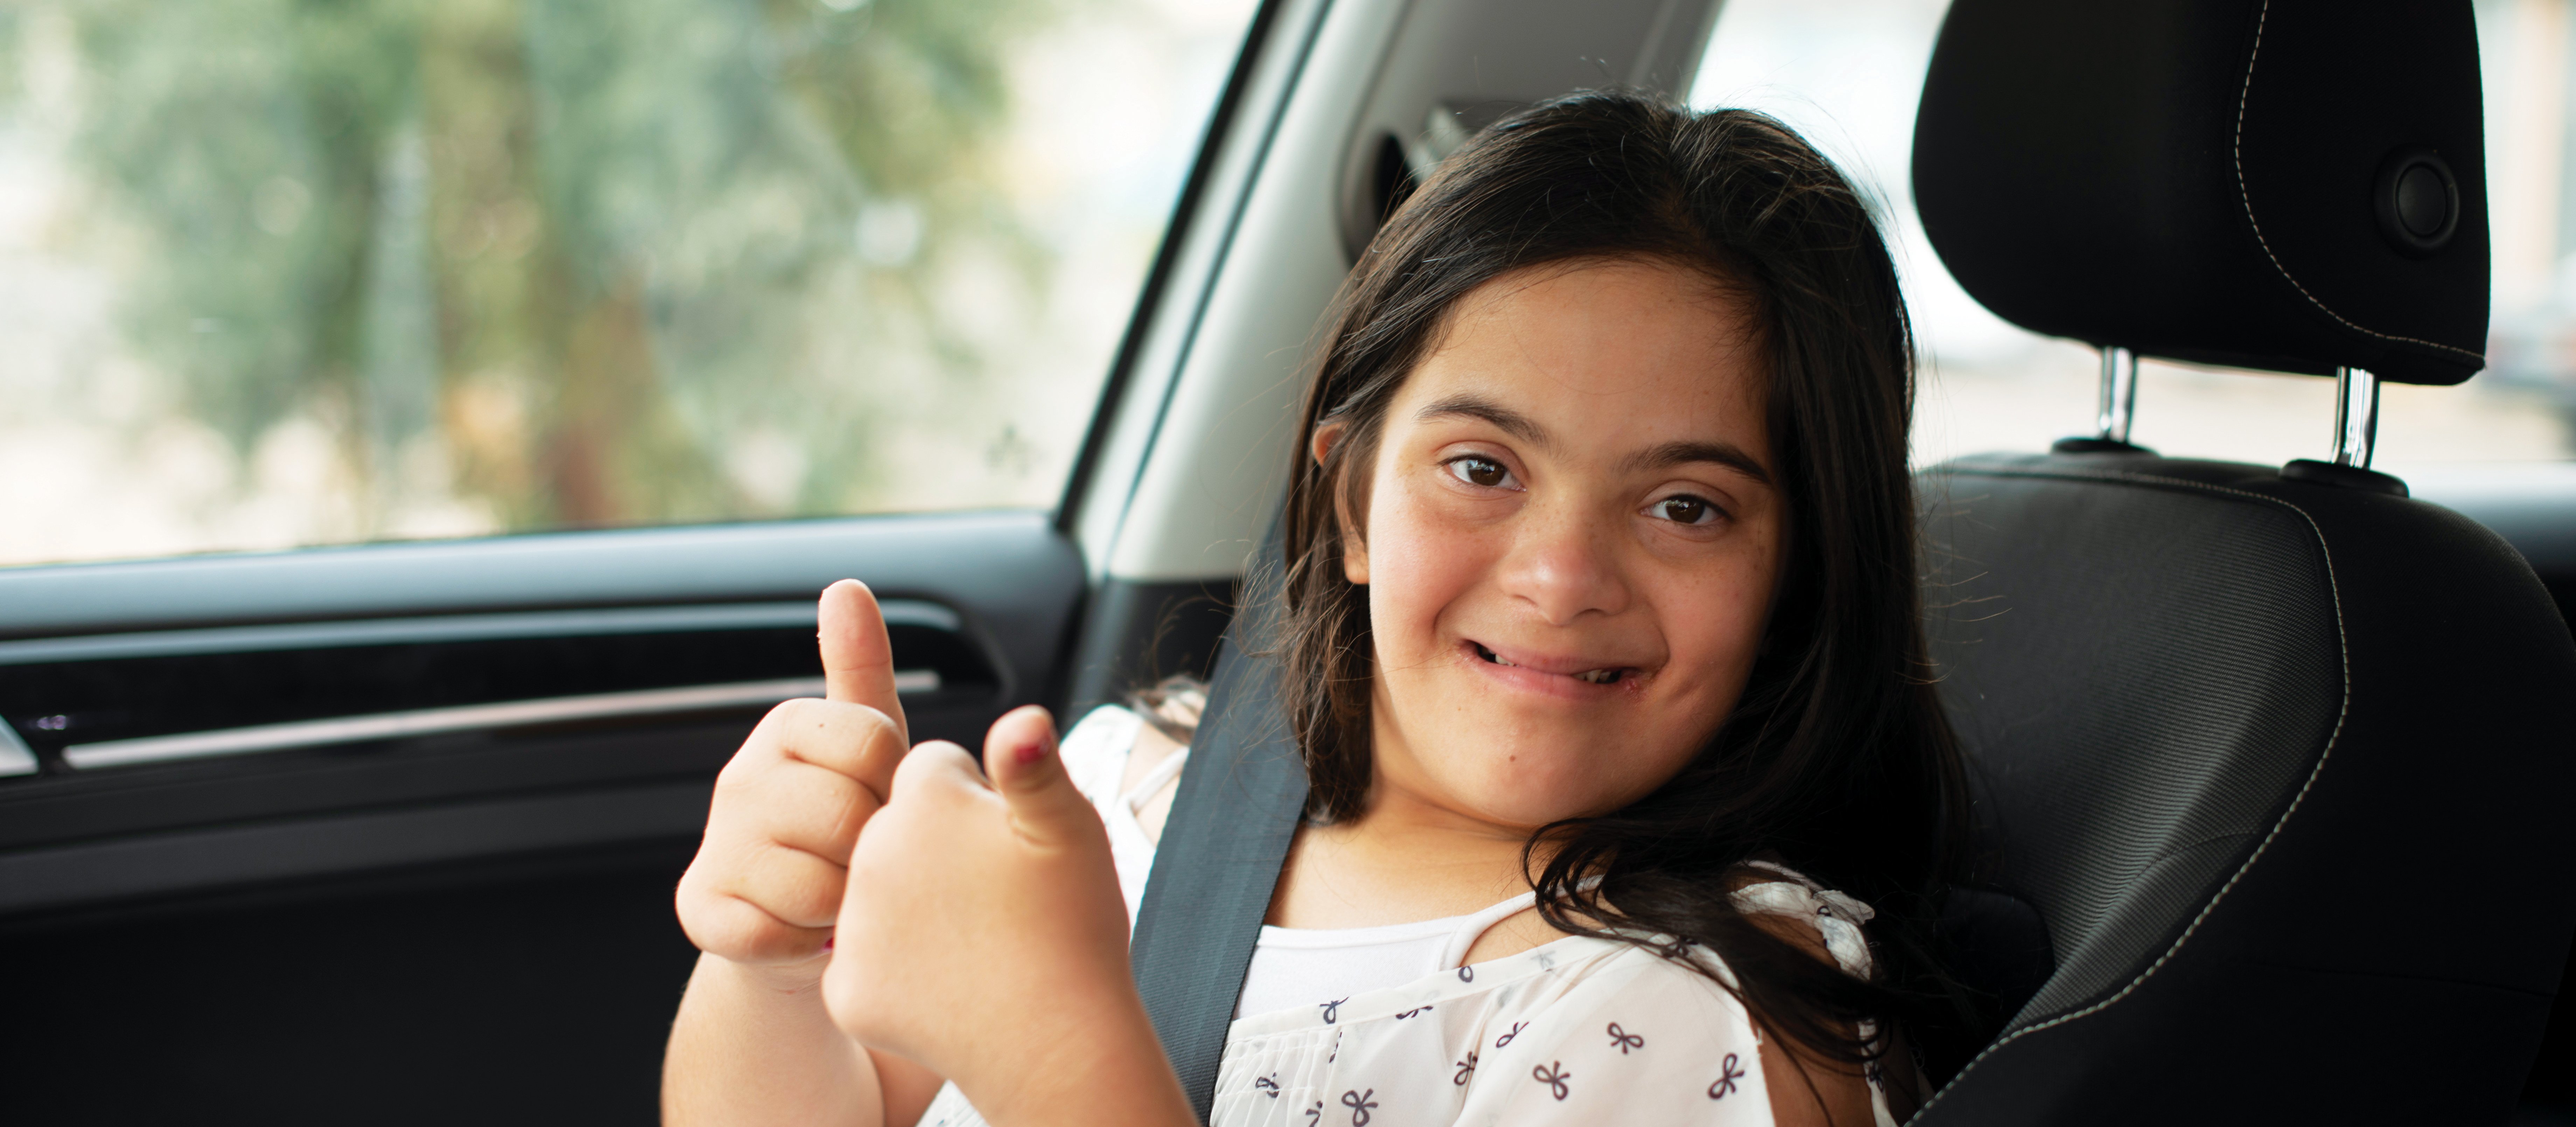 Down syndrome girl in car